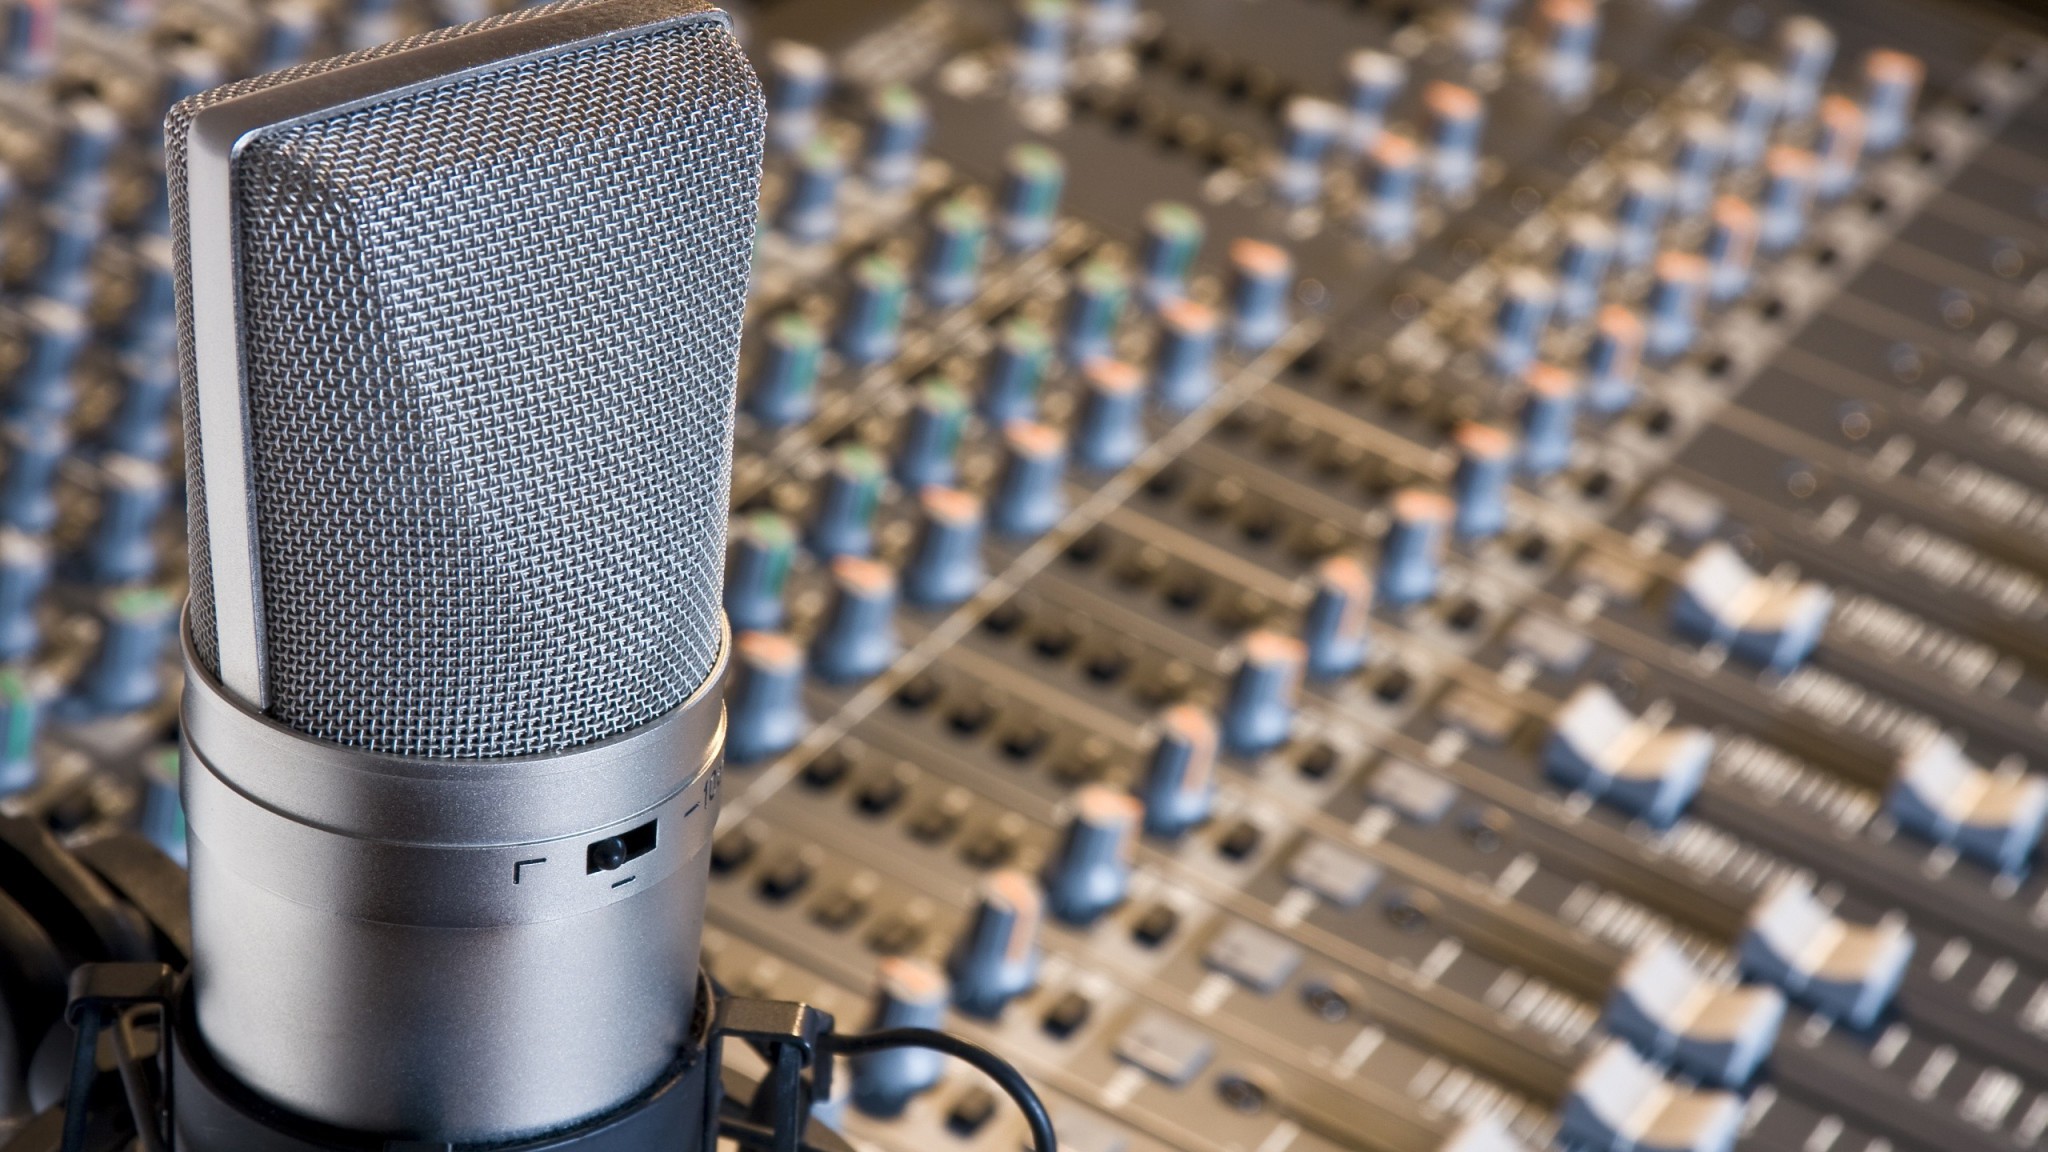 Music Studio Microphones - Audio And Video Production - HD Wallpaper 